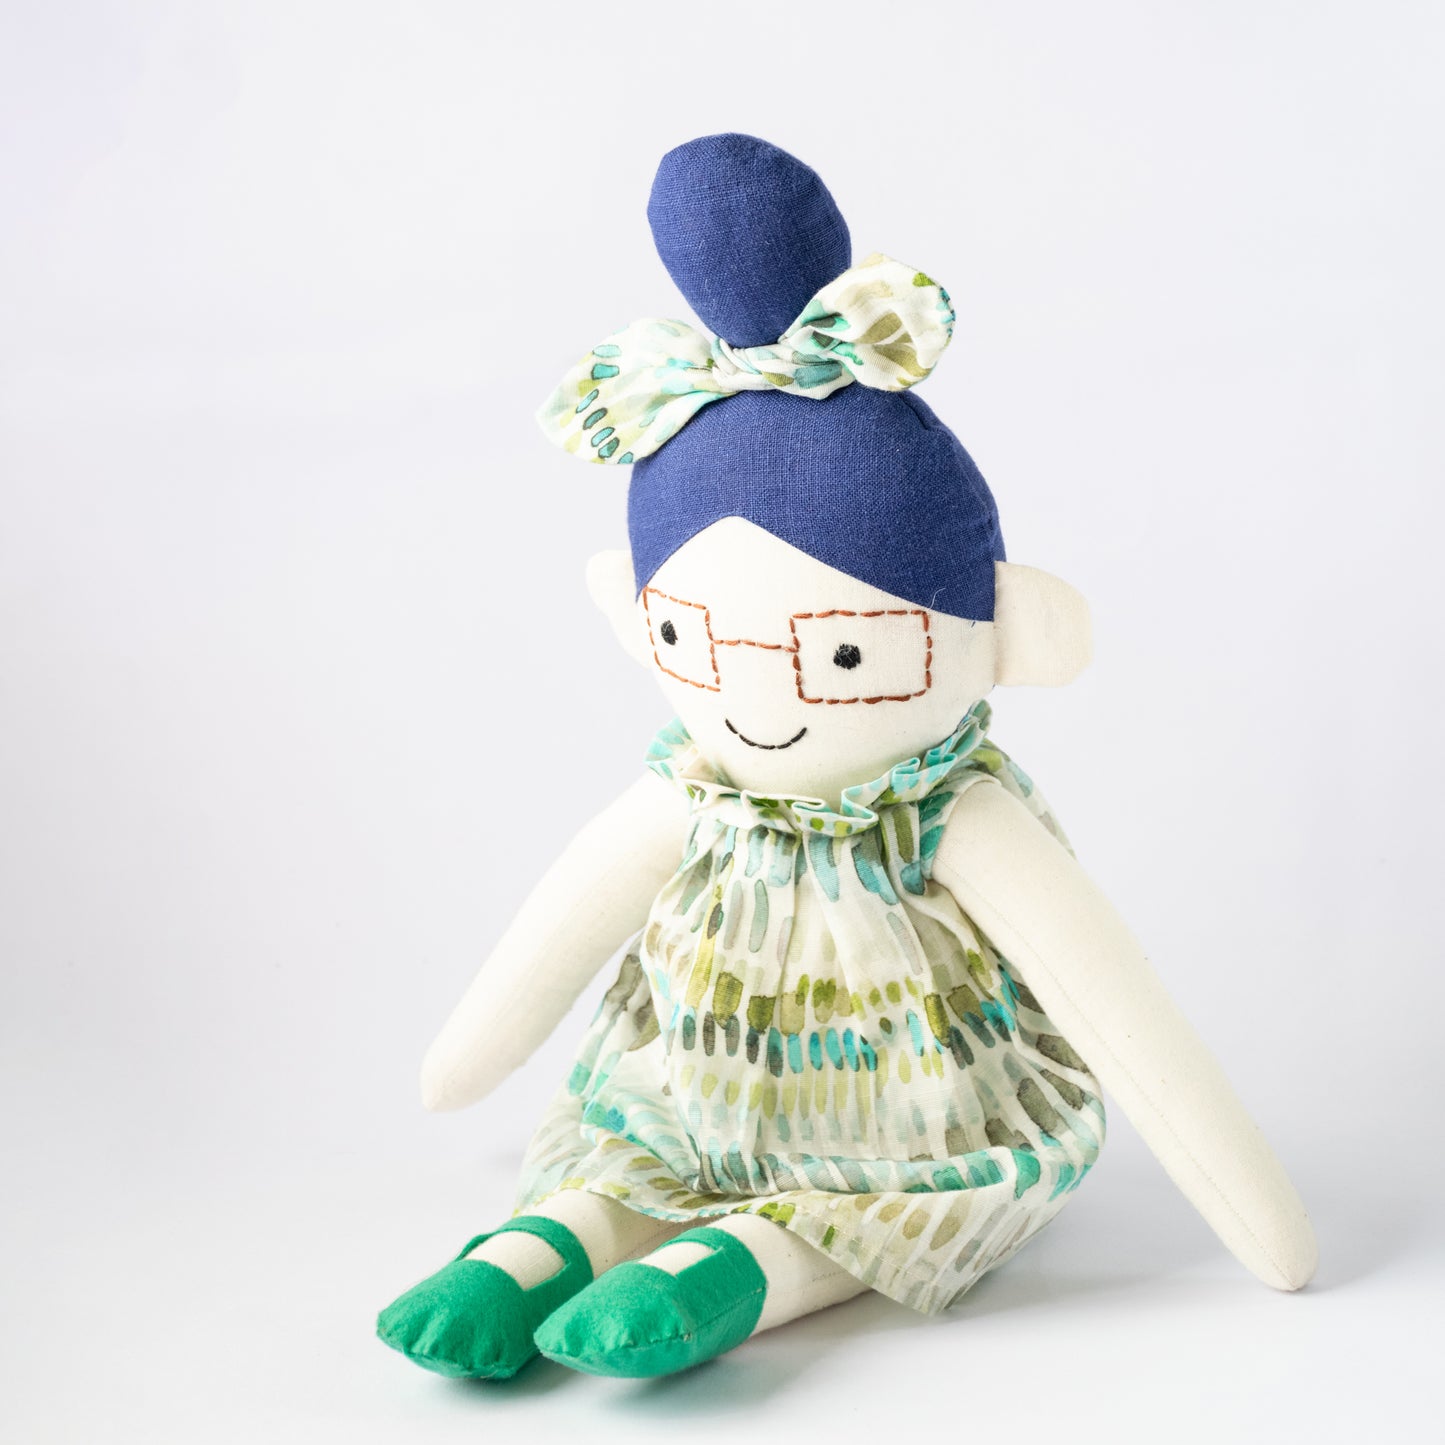 AMELIA - The Doll With Specs